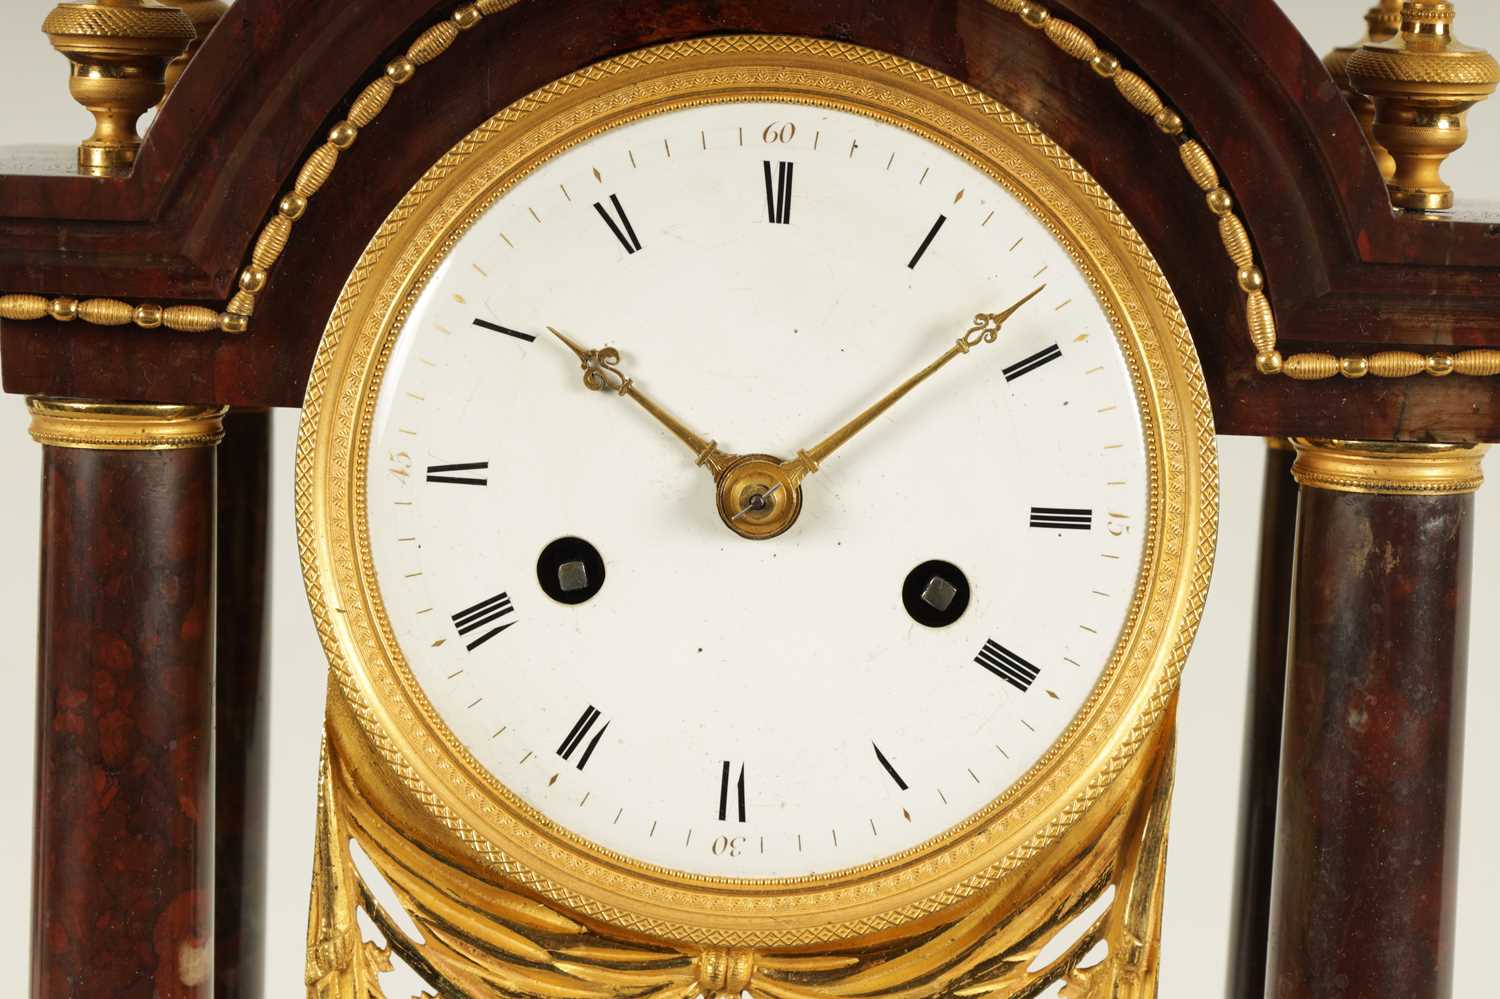 AN EARLY 19TH CENTURY FRENCH ROUGE MARBLE AND ORMOLU PORTICO MANTEL CLOCK - Image 3 of 12